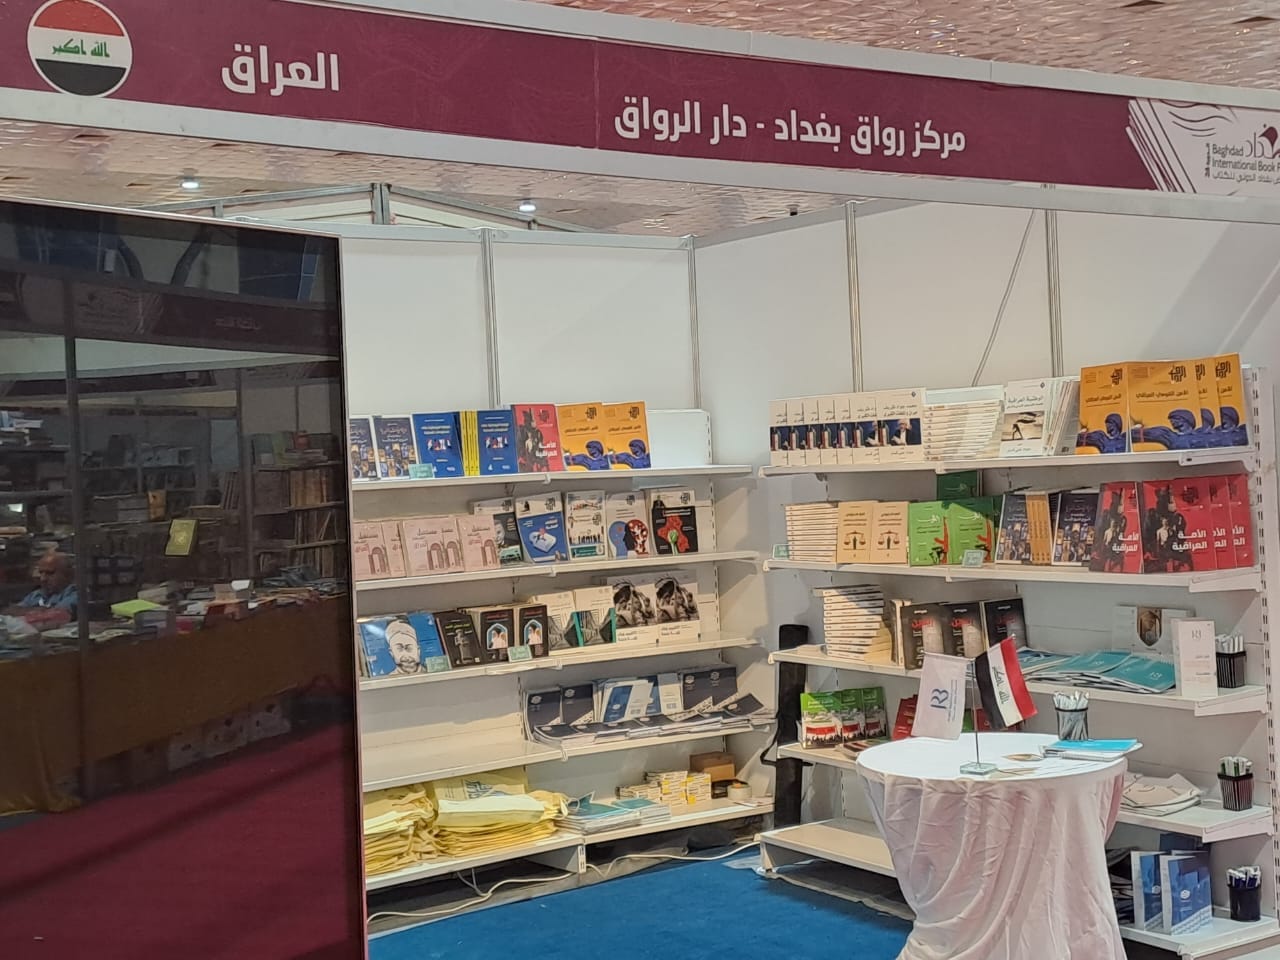 Al-Rewaq Baghdad Center for Public Policies' participation in the 24th edition of the Baghdad International Book Fair.